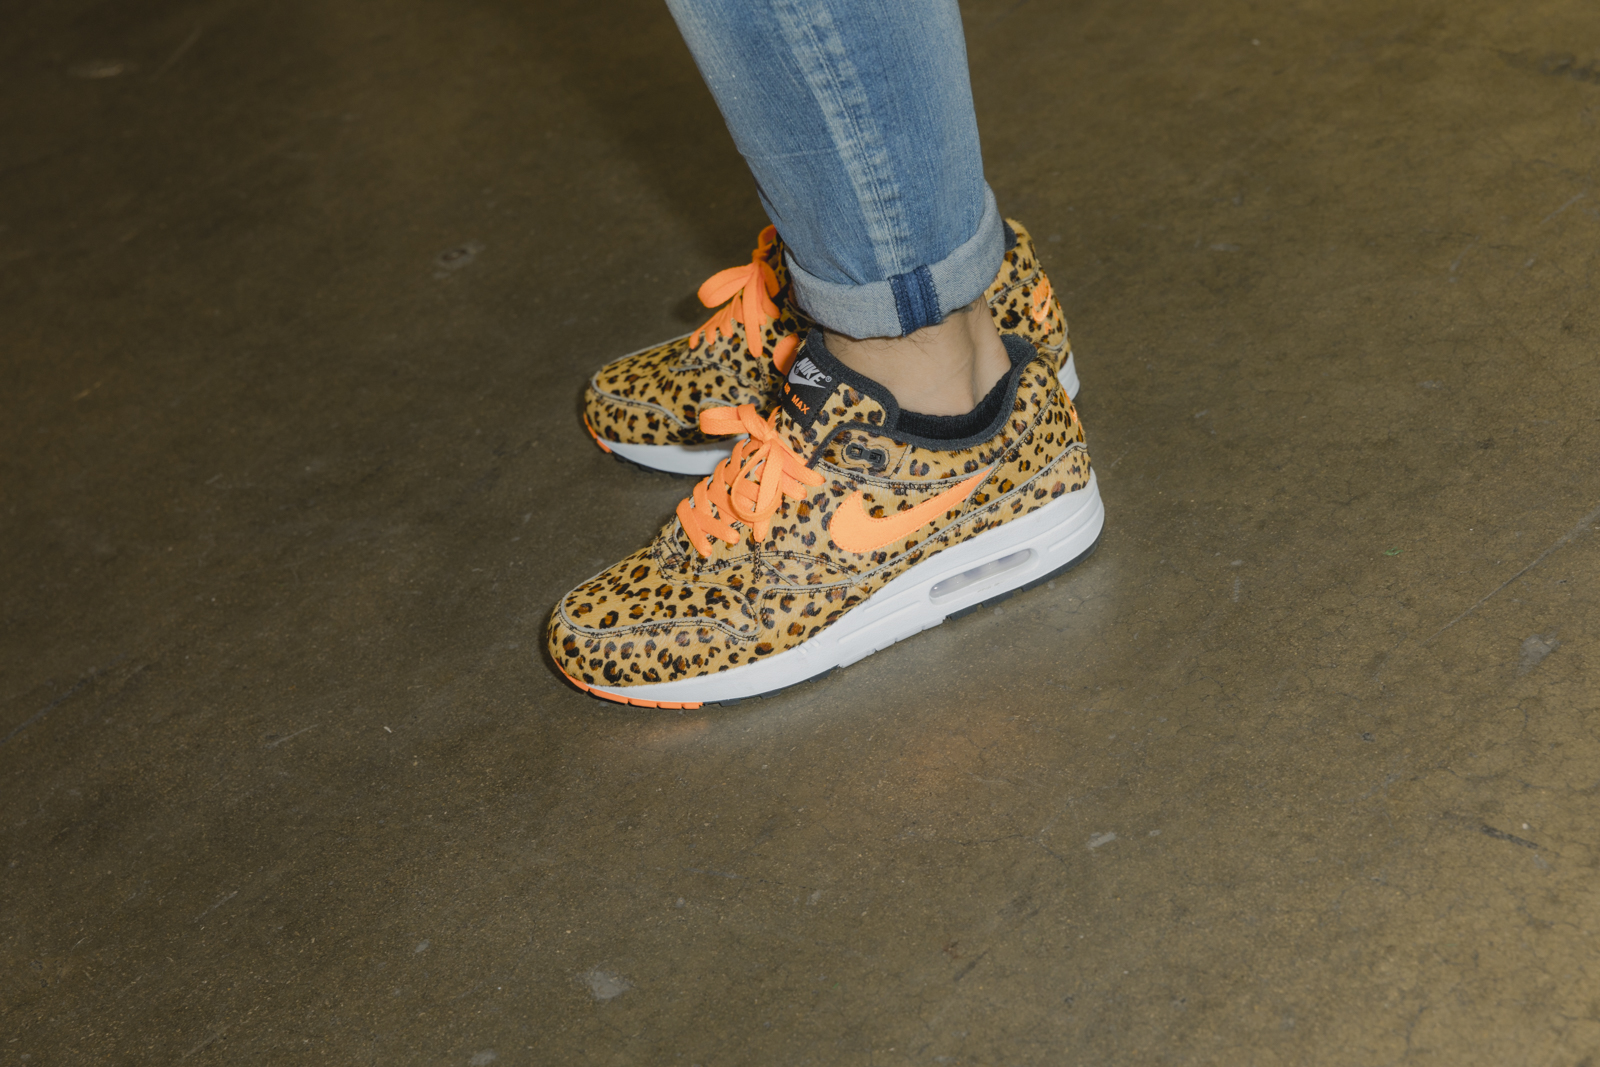 ComplexCon Chicago Sneakers Atmos x Nike Air Max 1 Animal 3.0 Leopard